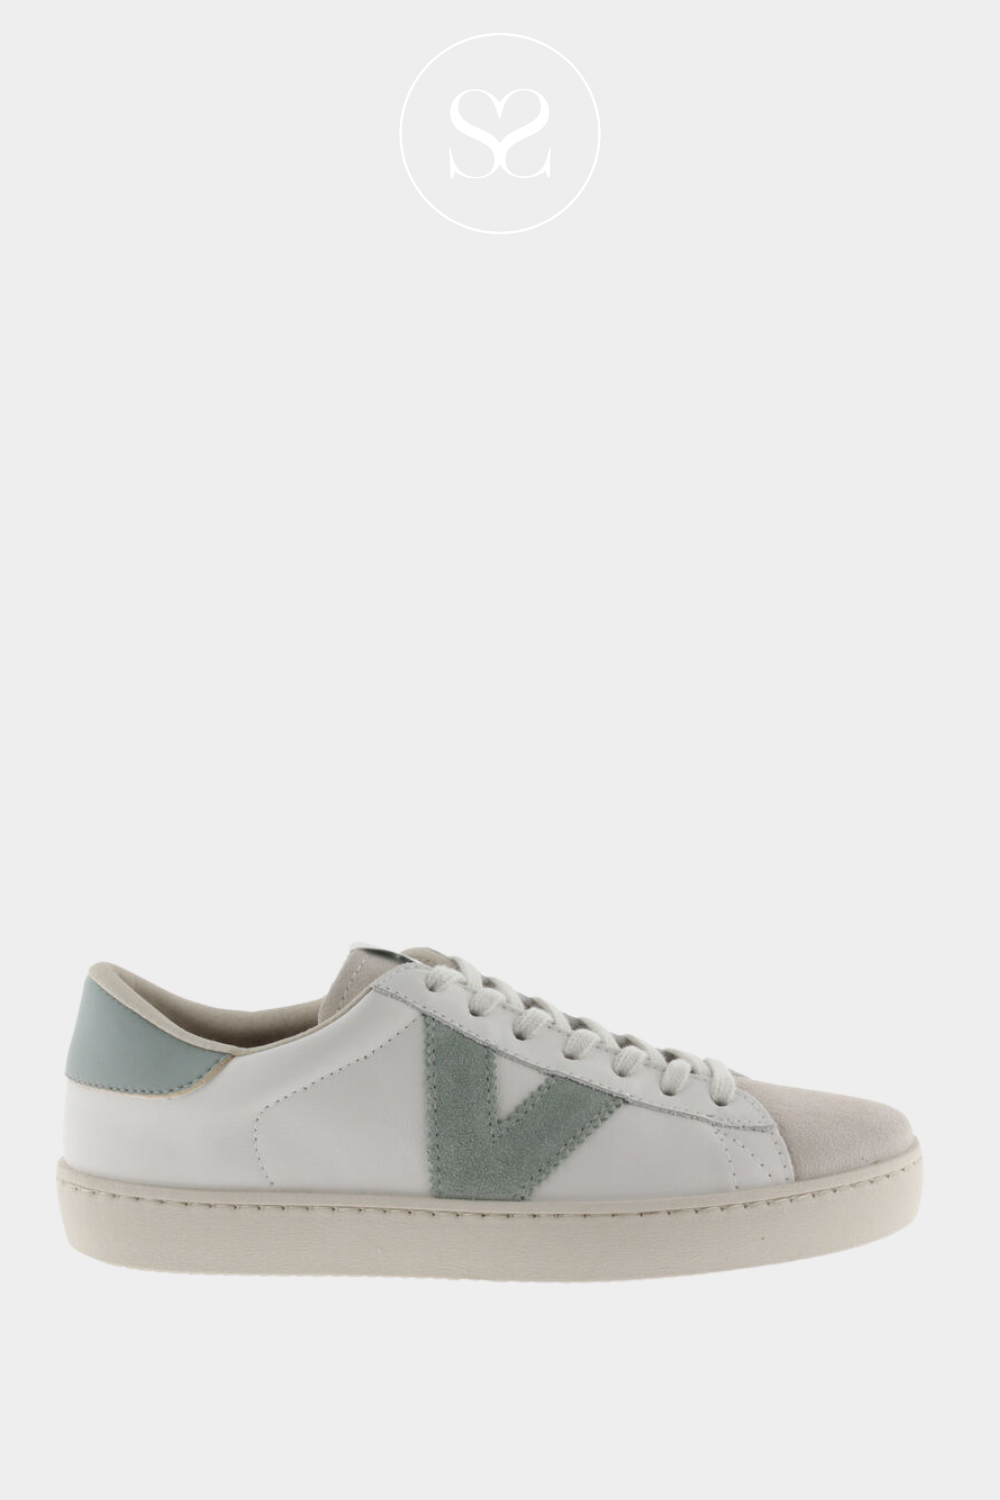 VICTORIA 126142 WHITE FLAT TRAINERS WITH LACES AND SUEDE TOE. SAGE V ON THE SIDE. VEJA STYLE